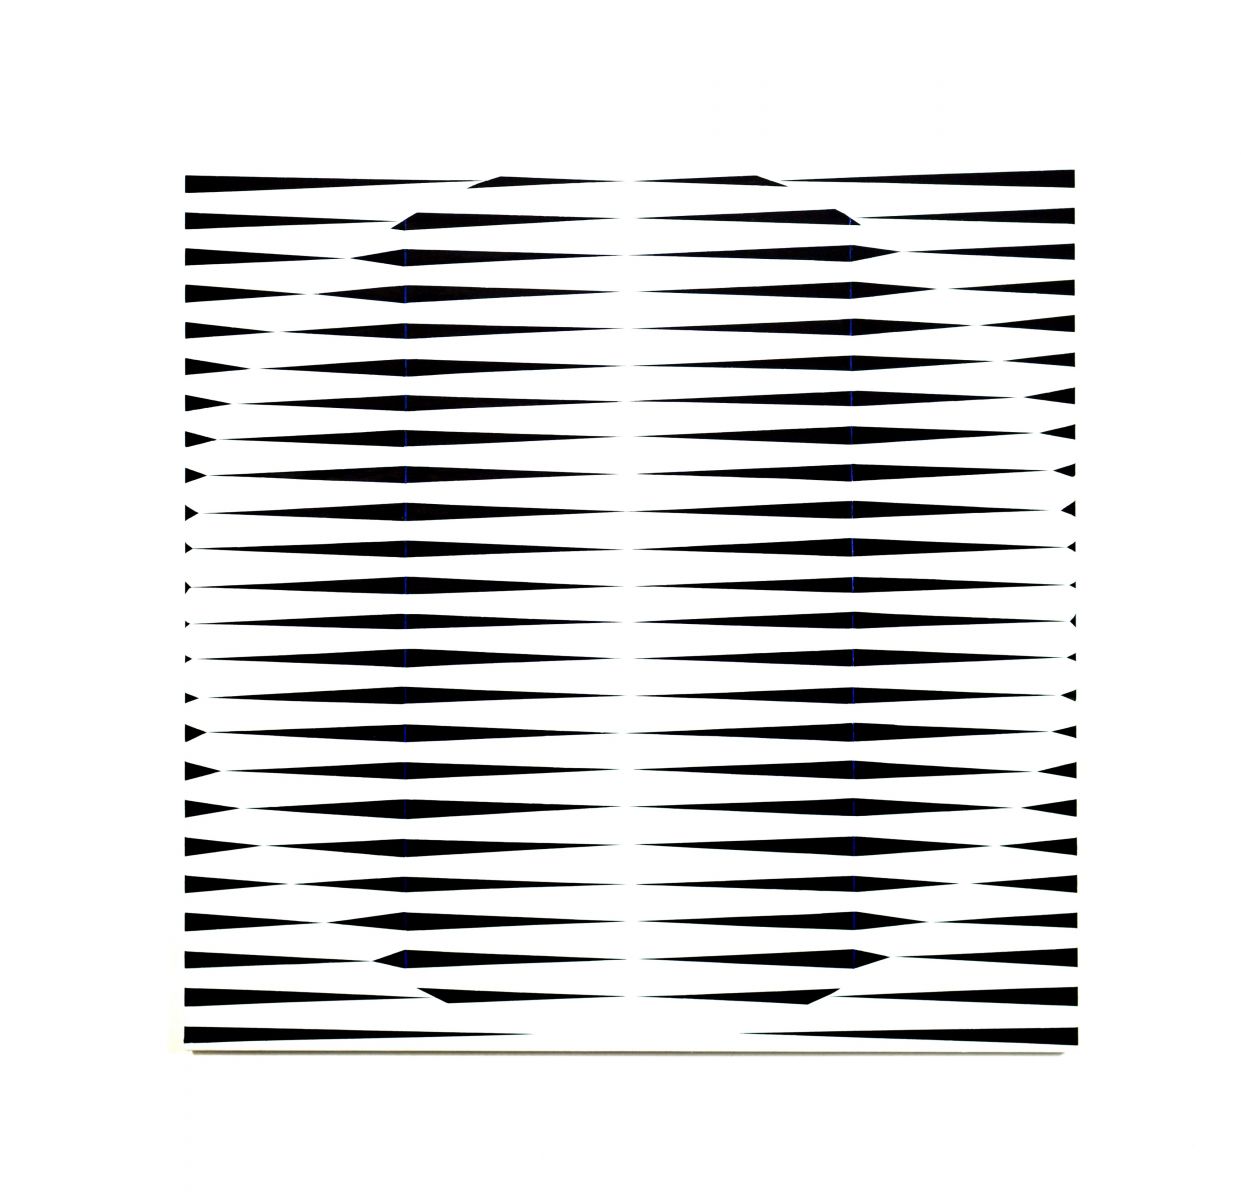 Christian Eder-art-Painting-space-white circle in white square-space-manhattan